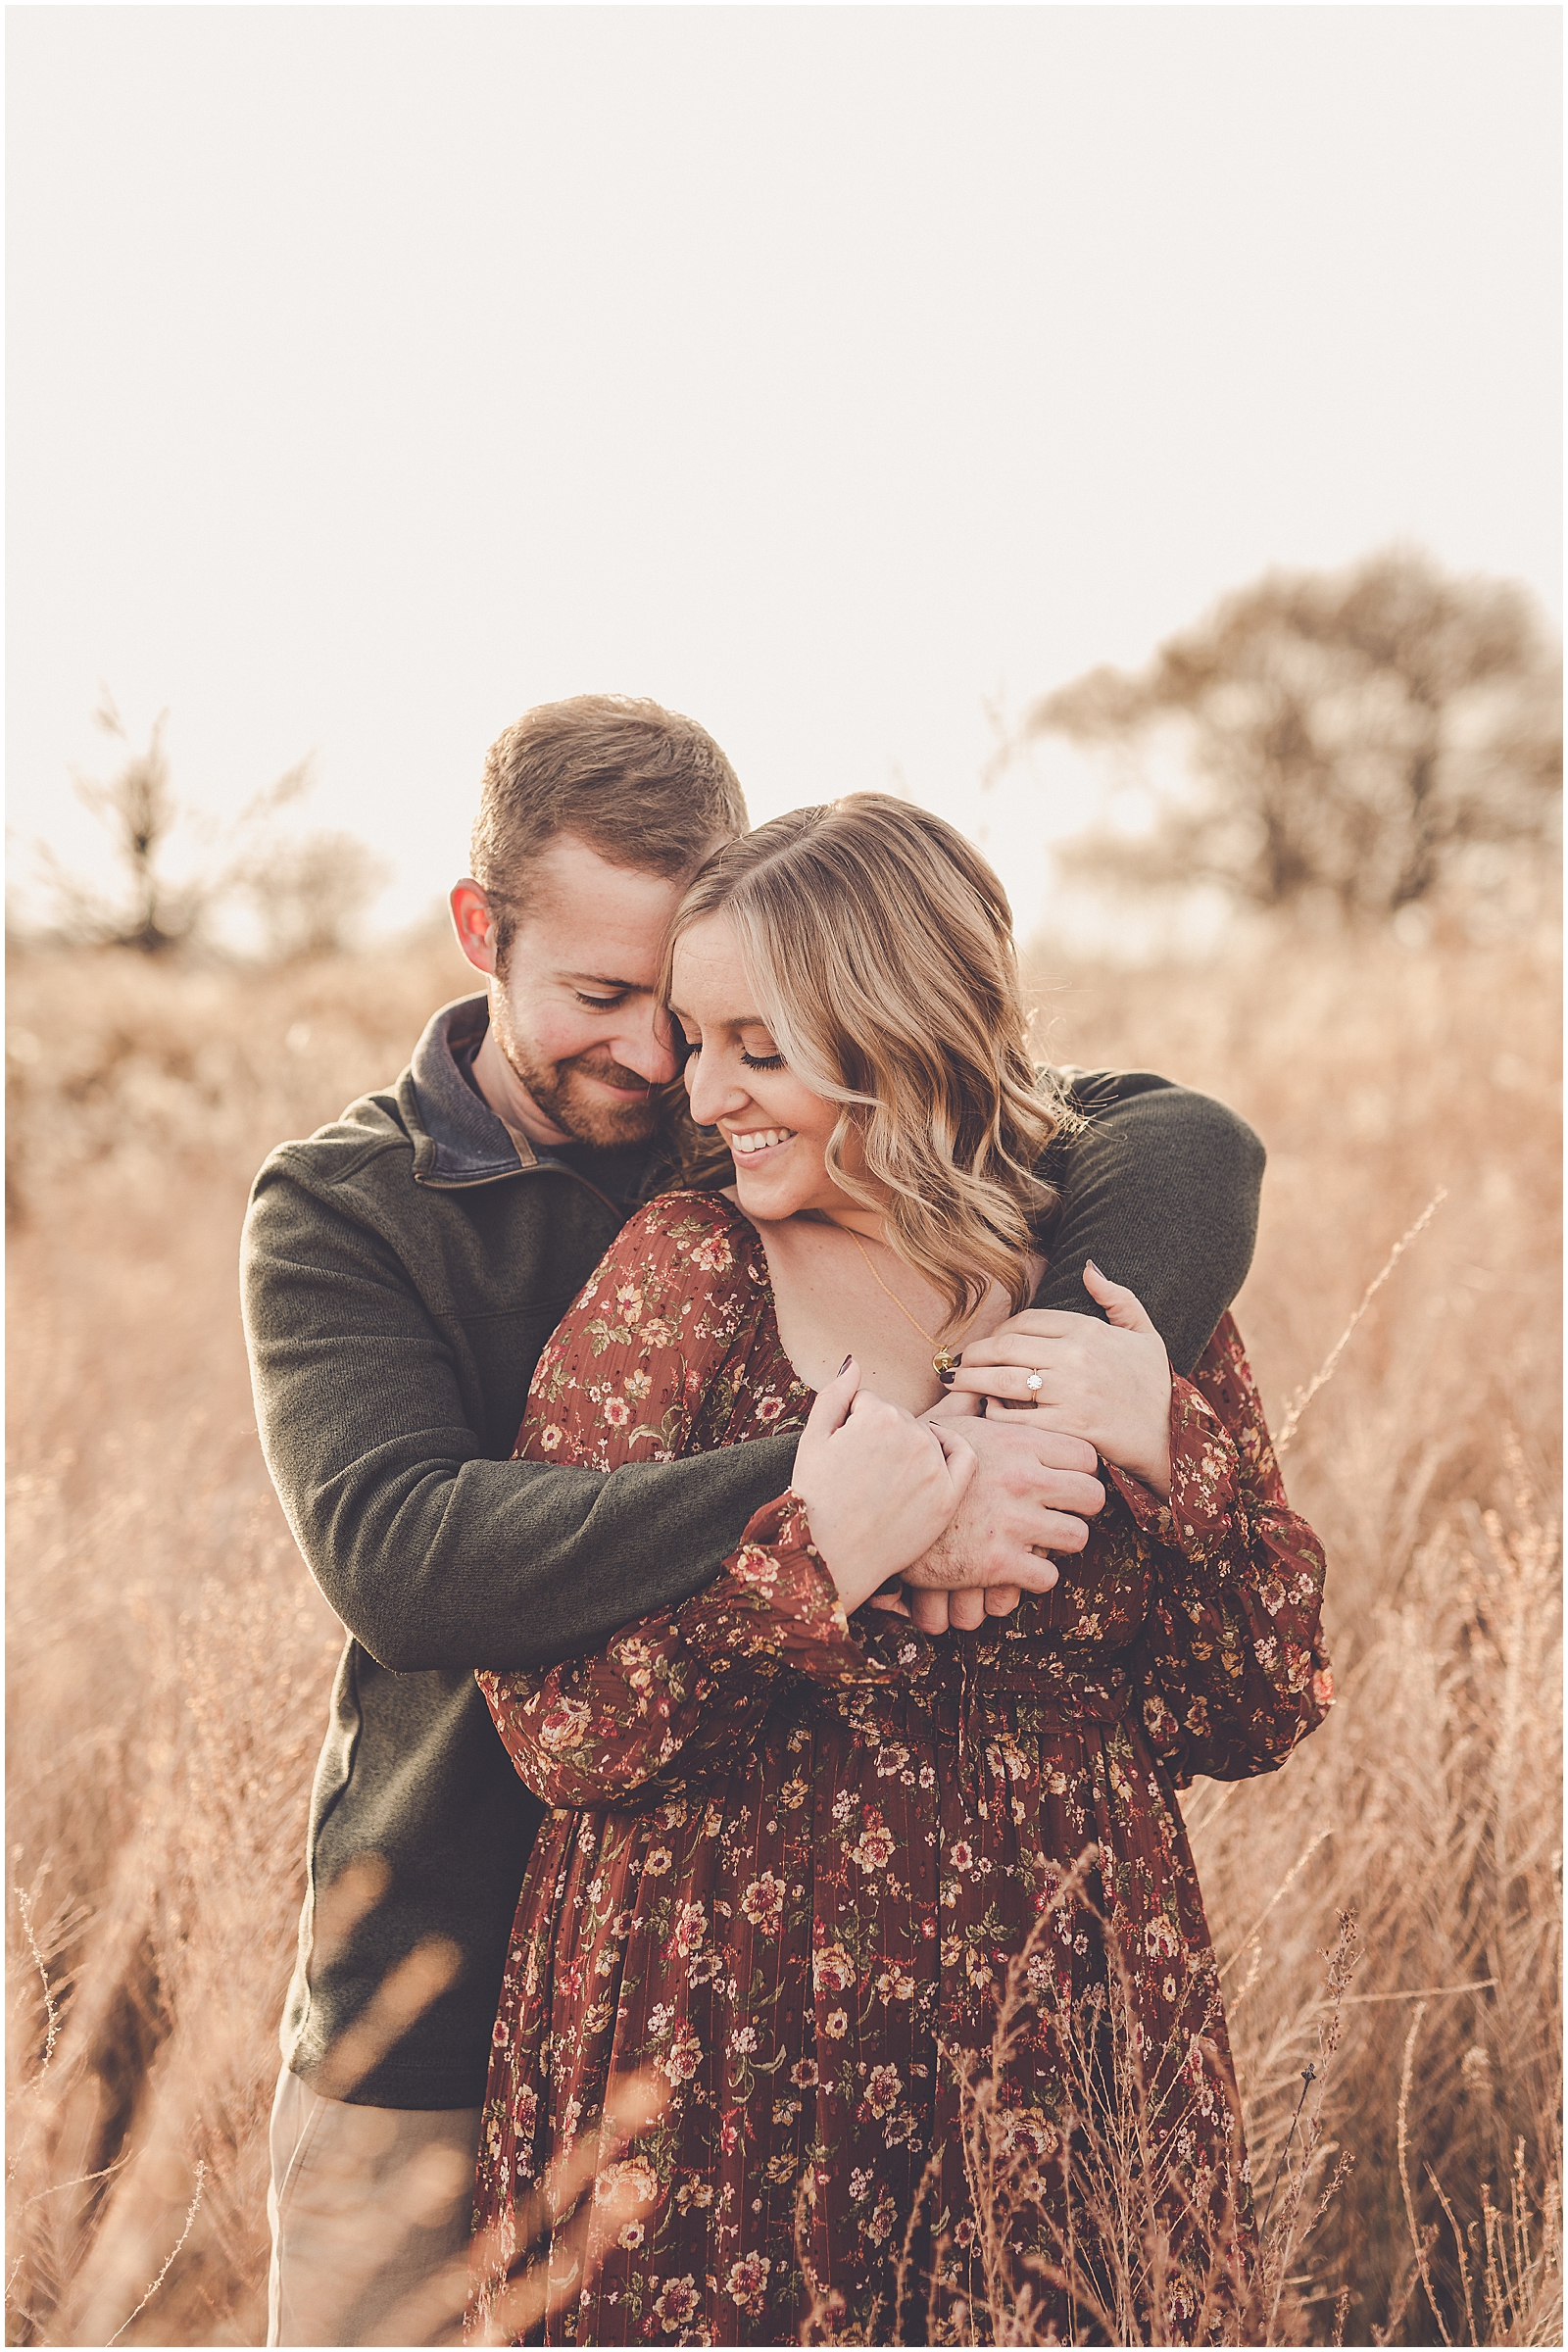 Abby and Max's studio and tree farm engagement photos in Kankakee, Illinois with Chicagoland wedding photographer Kara Evans Photographer.